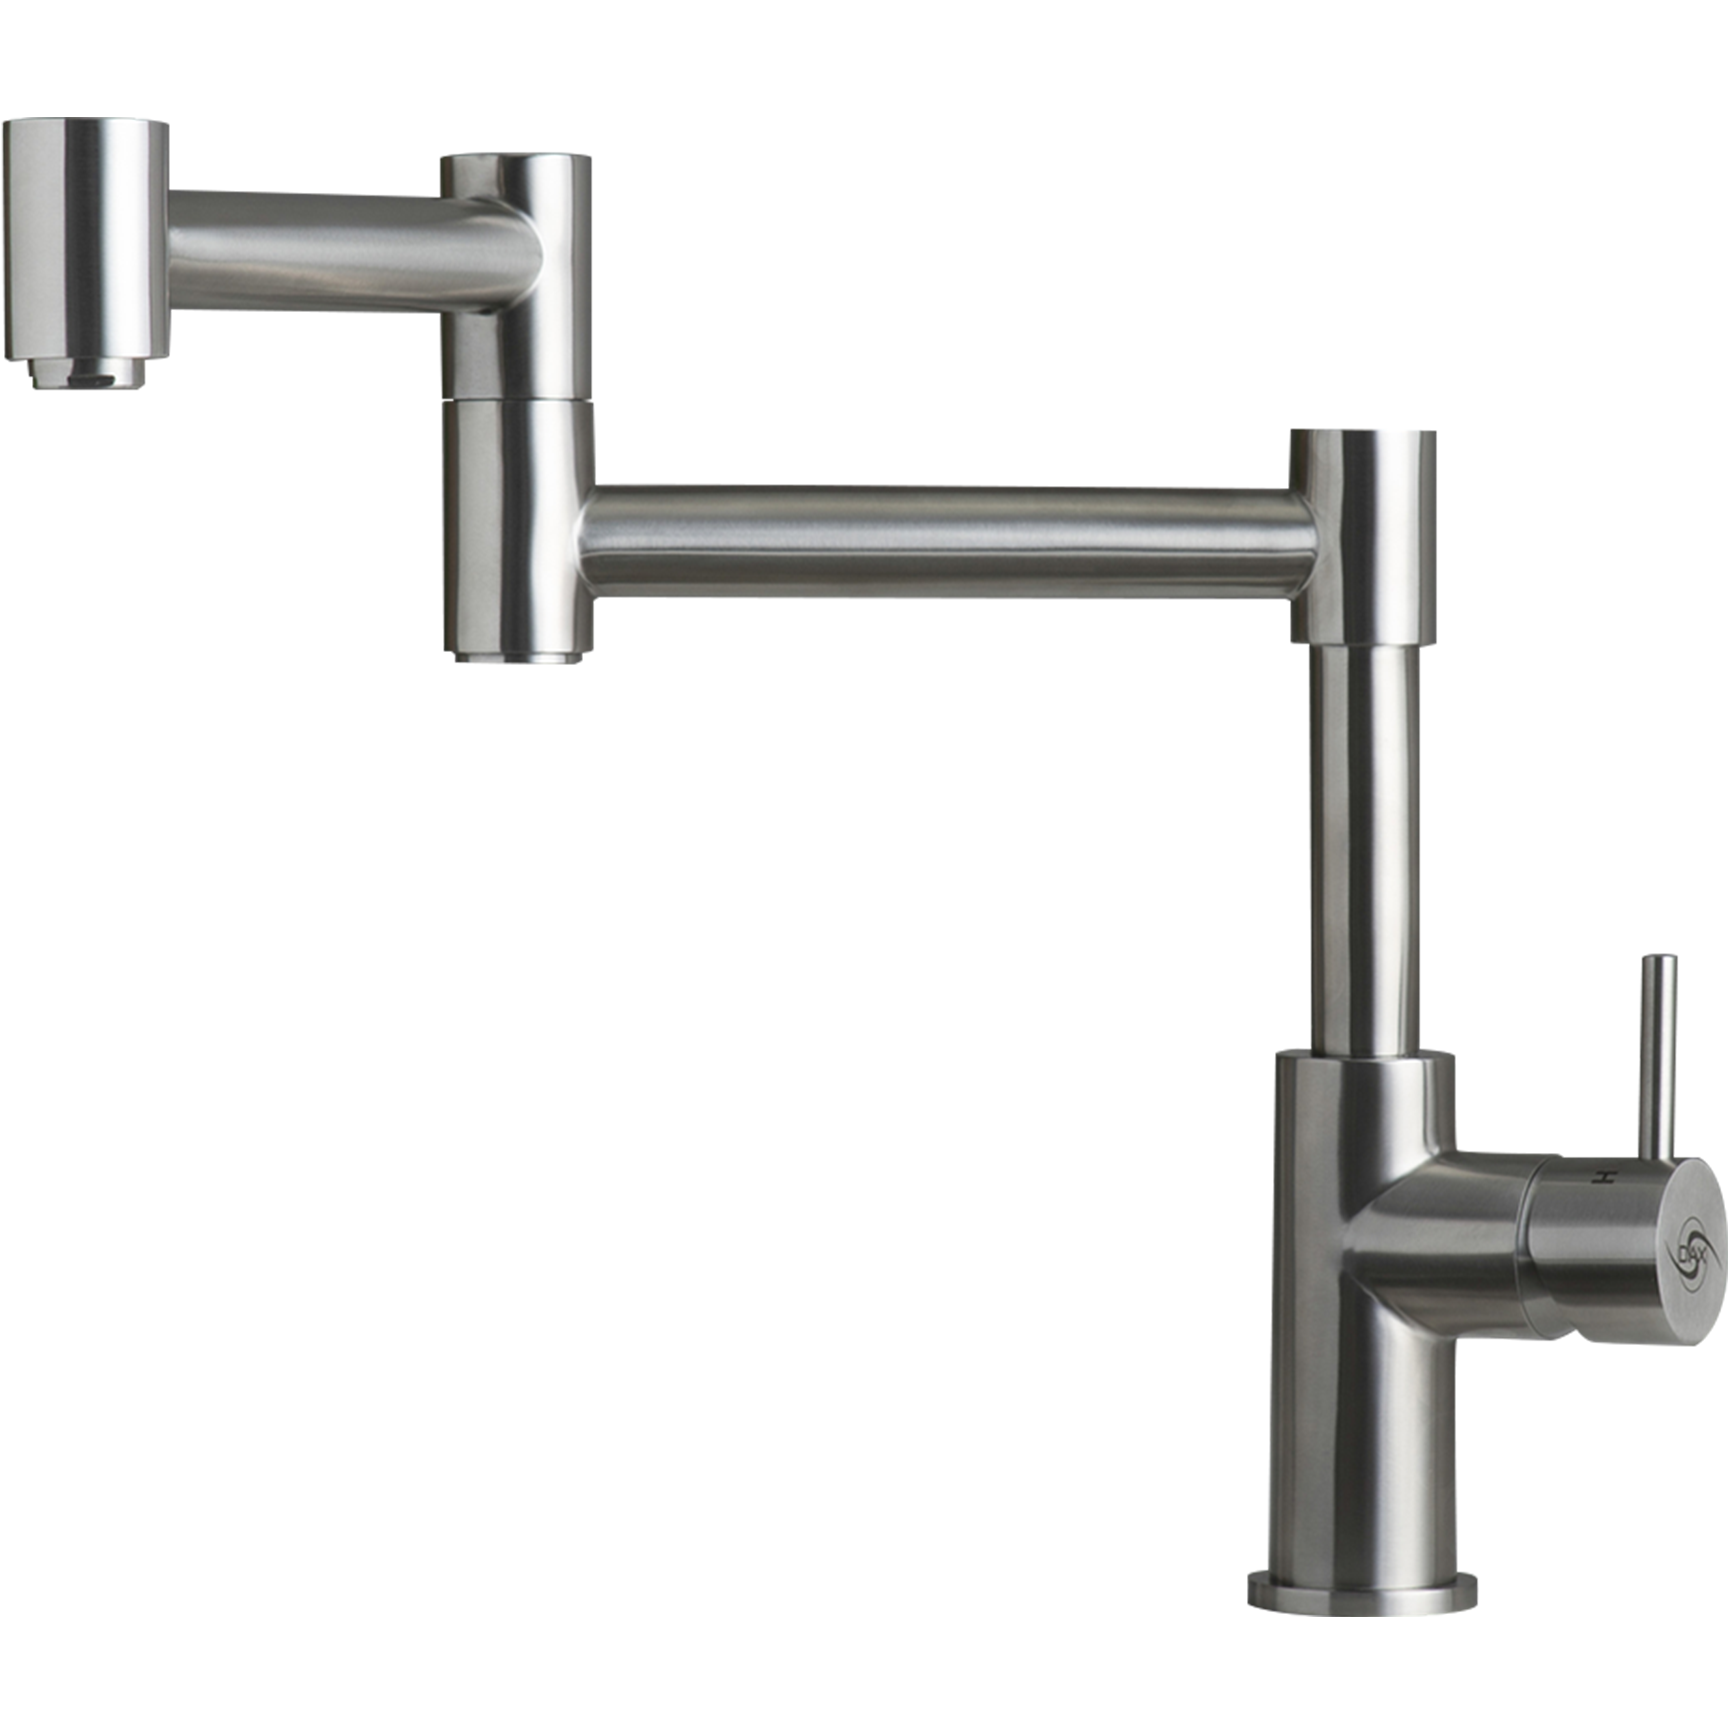 DAX Modern Sink Kitchen Faucet, Single Lever, Stainless Steel Body, Brushed Finish, Size 7-1/2 x 12-3/4 Inches (DAX-006-01)